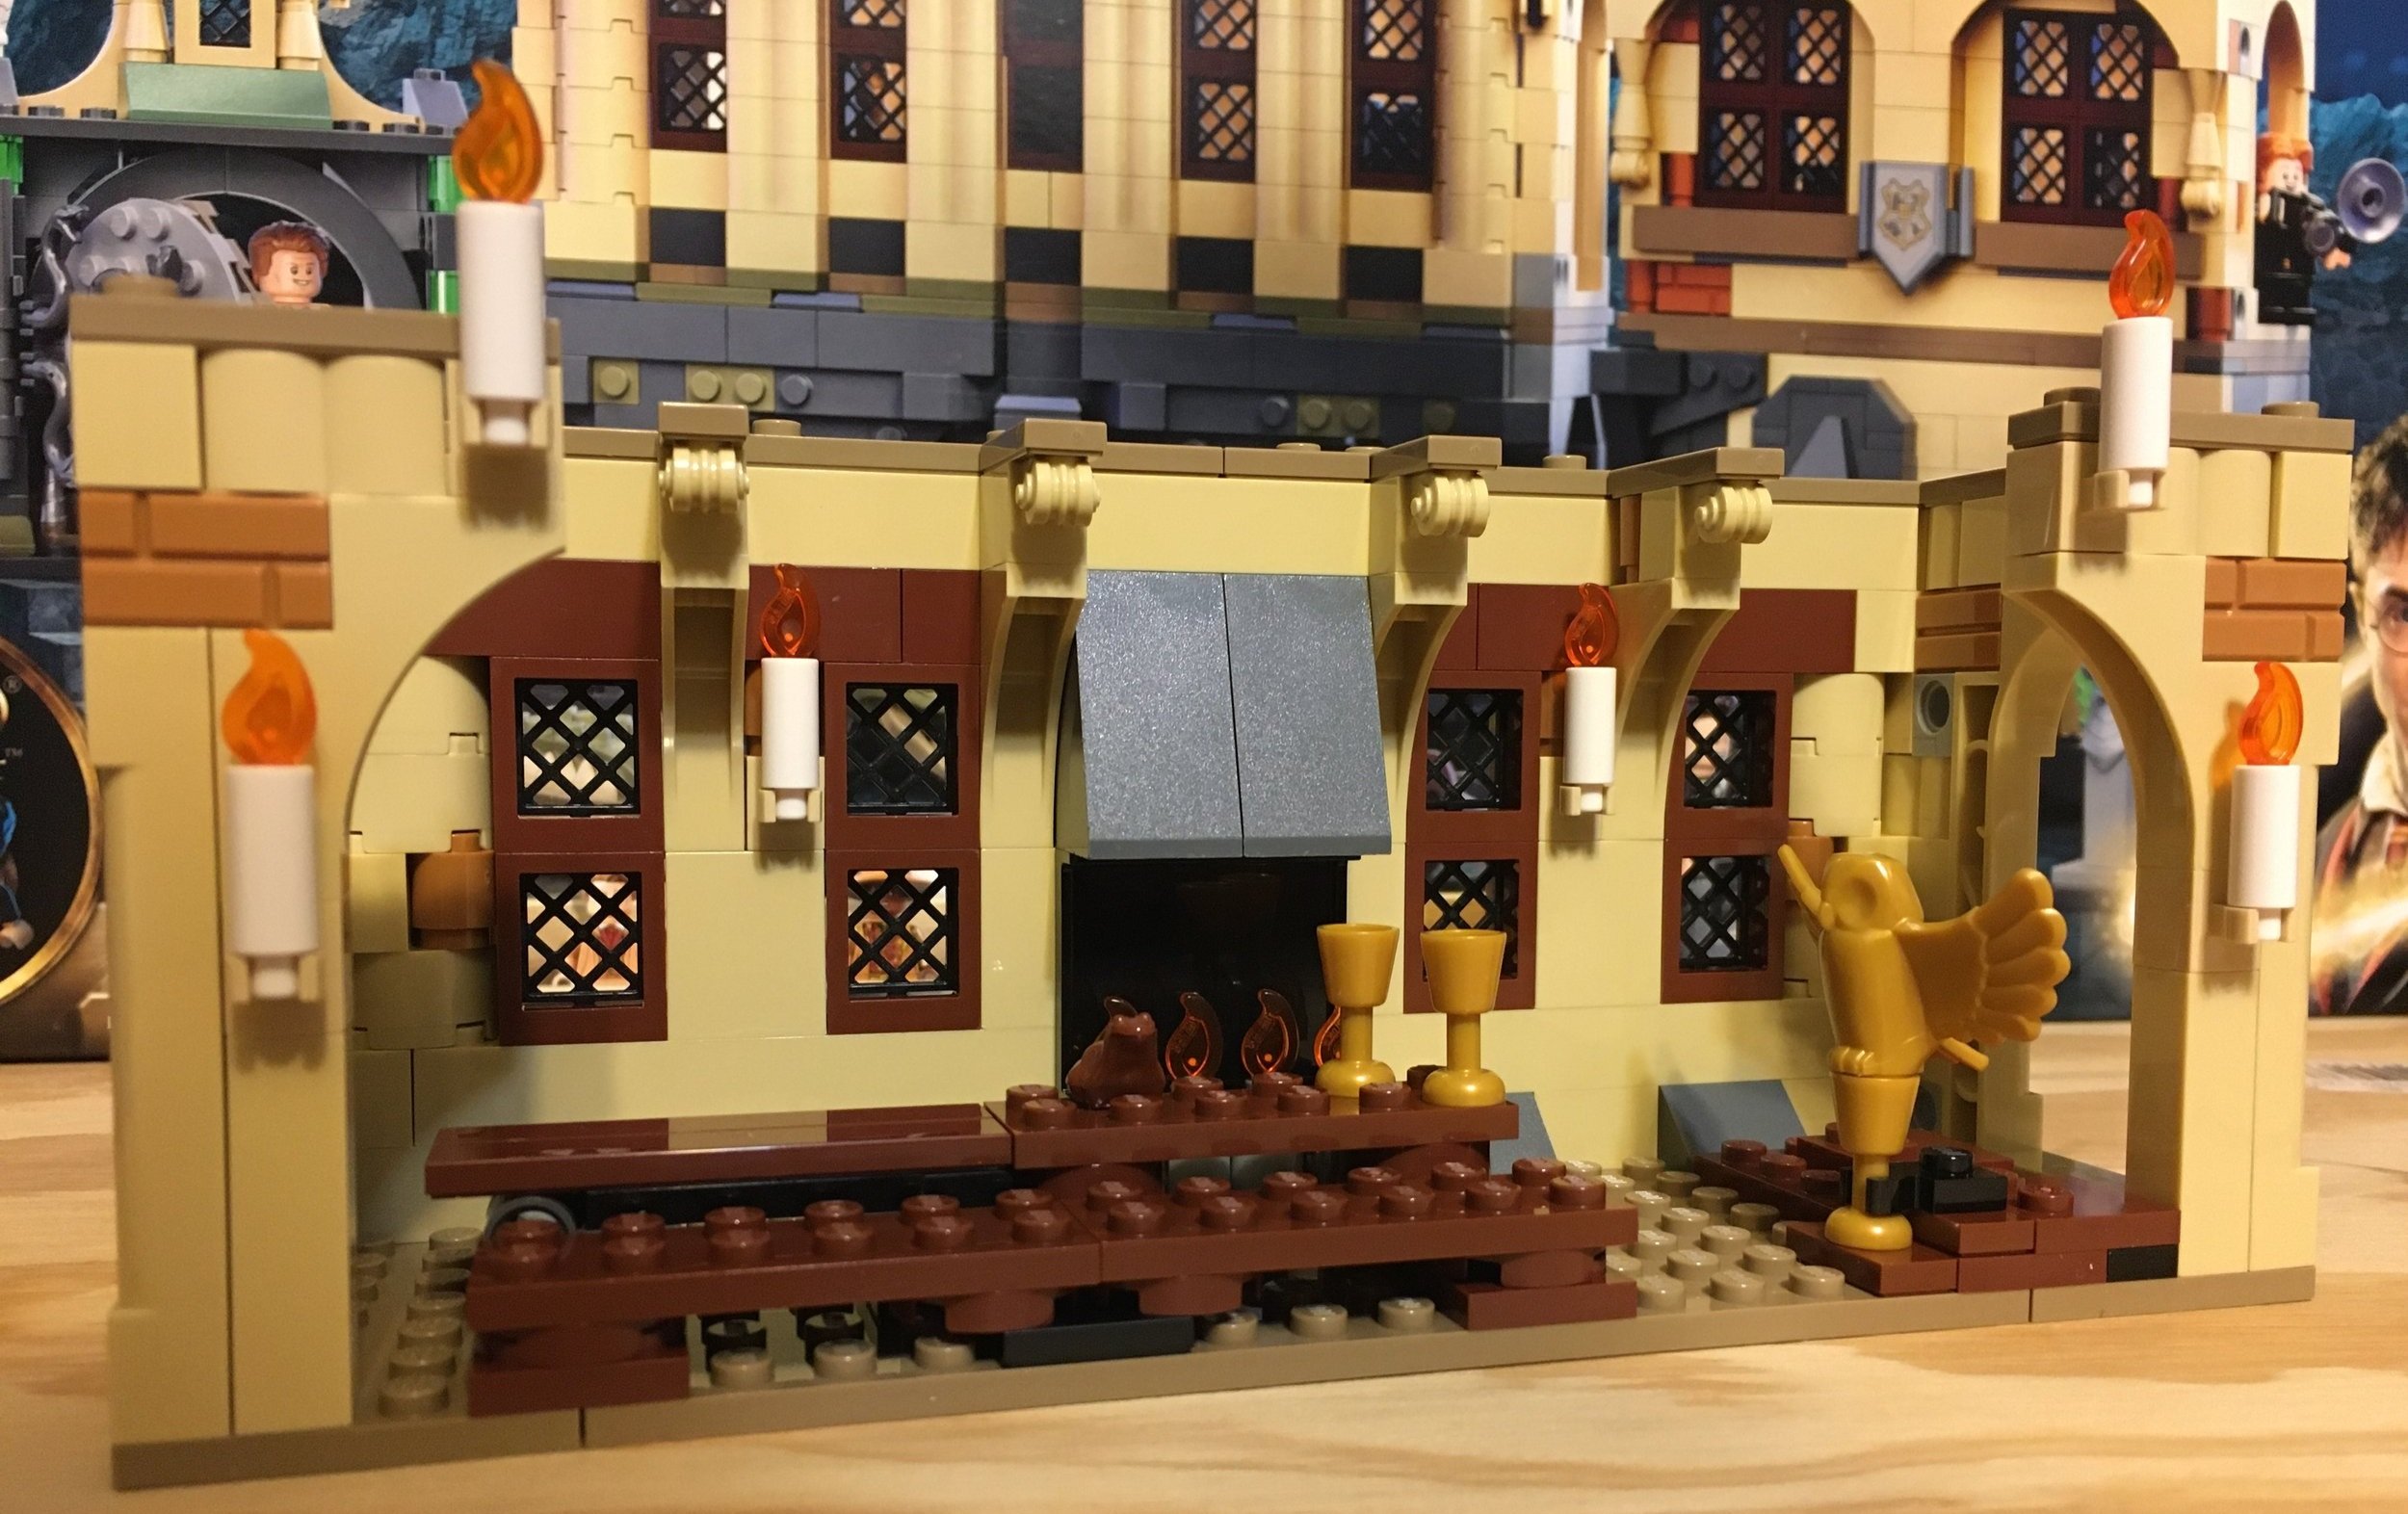 LEGO Harry Potter 76389 Hogwarts Chamber of Secrets [Review] - The Brothers  Brick